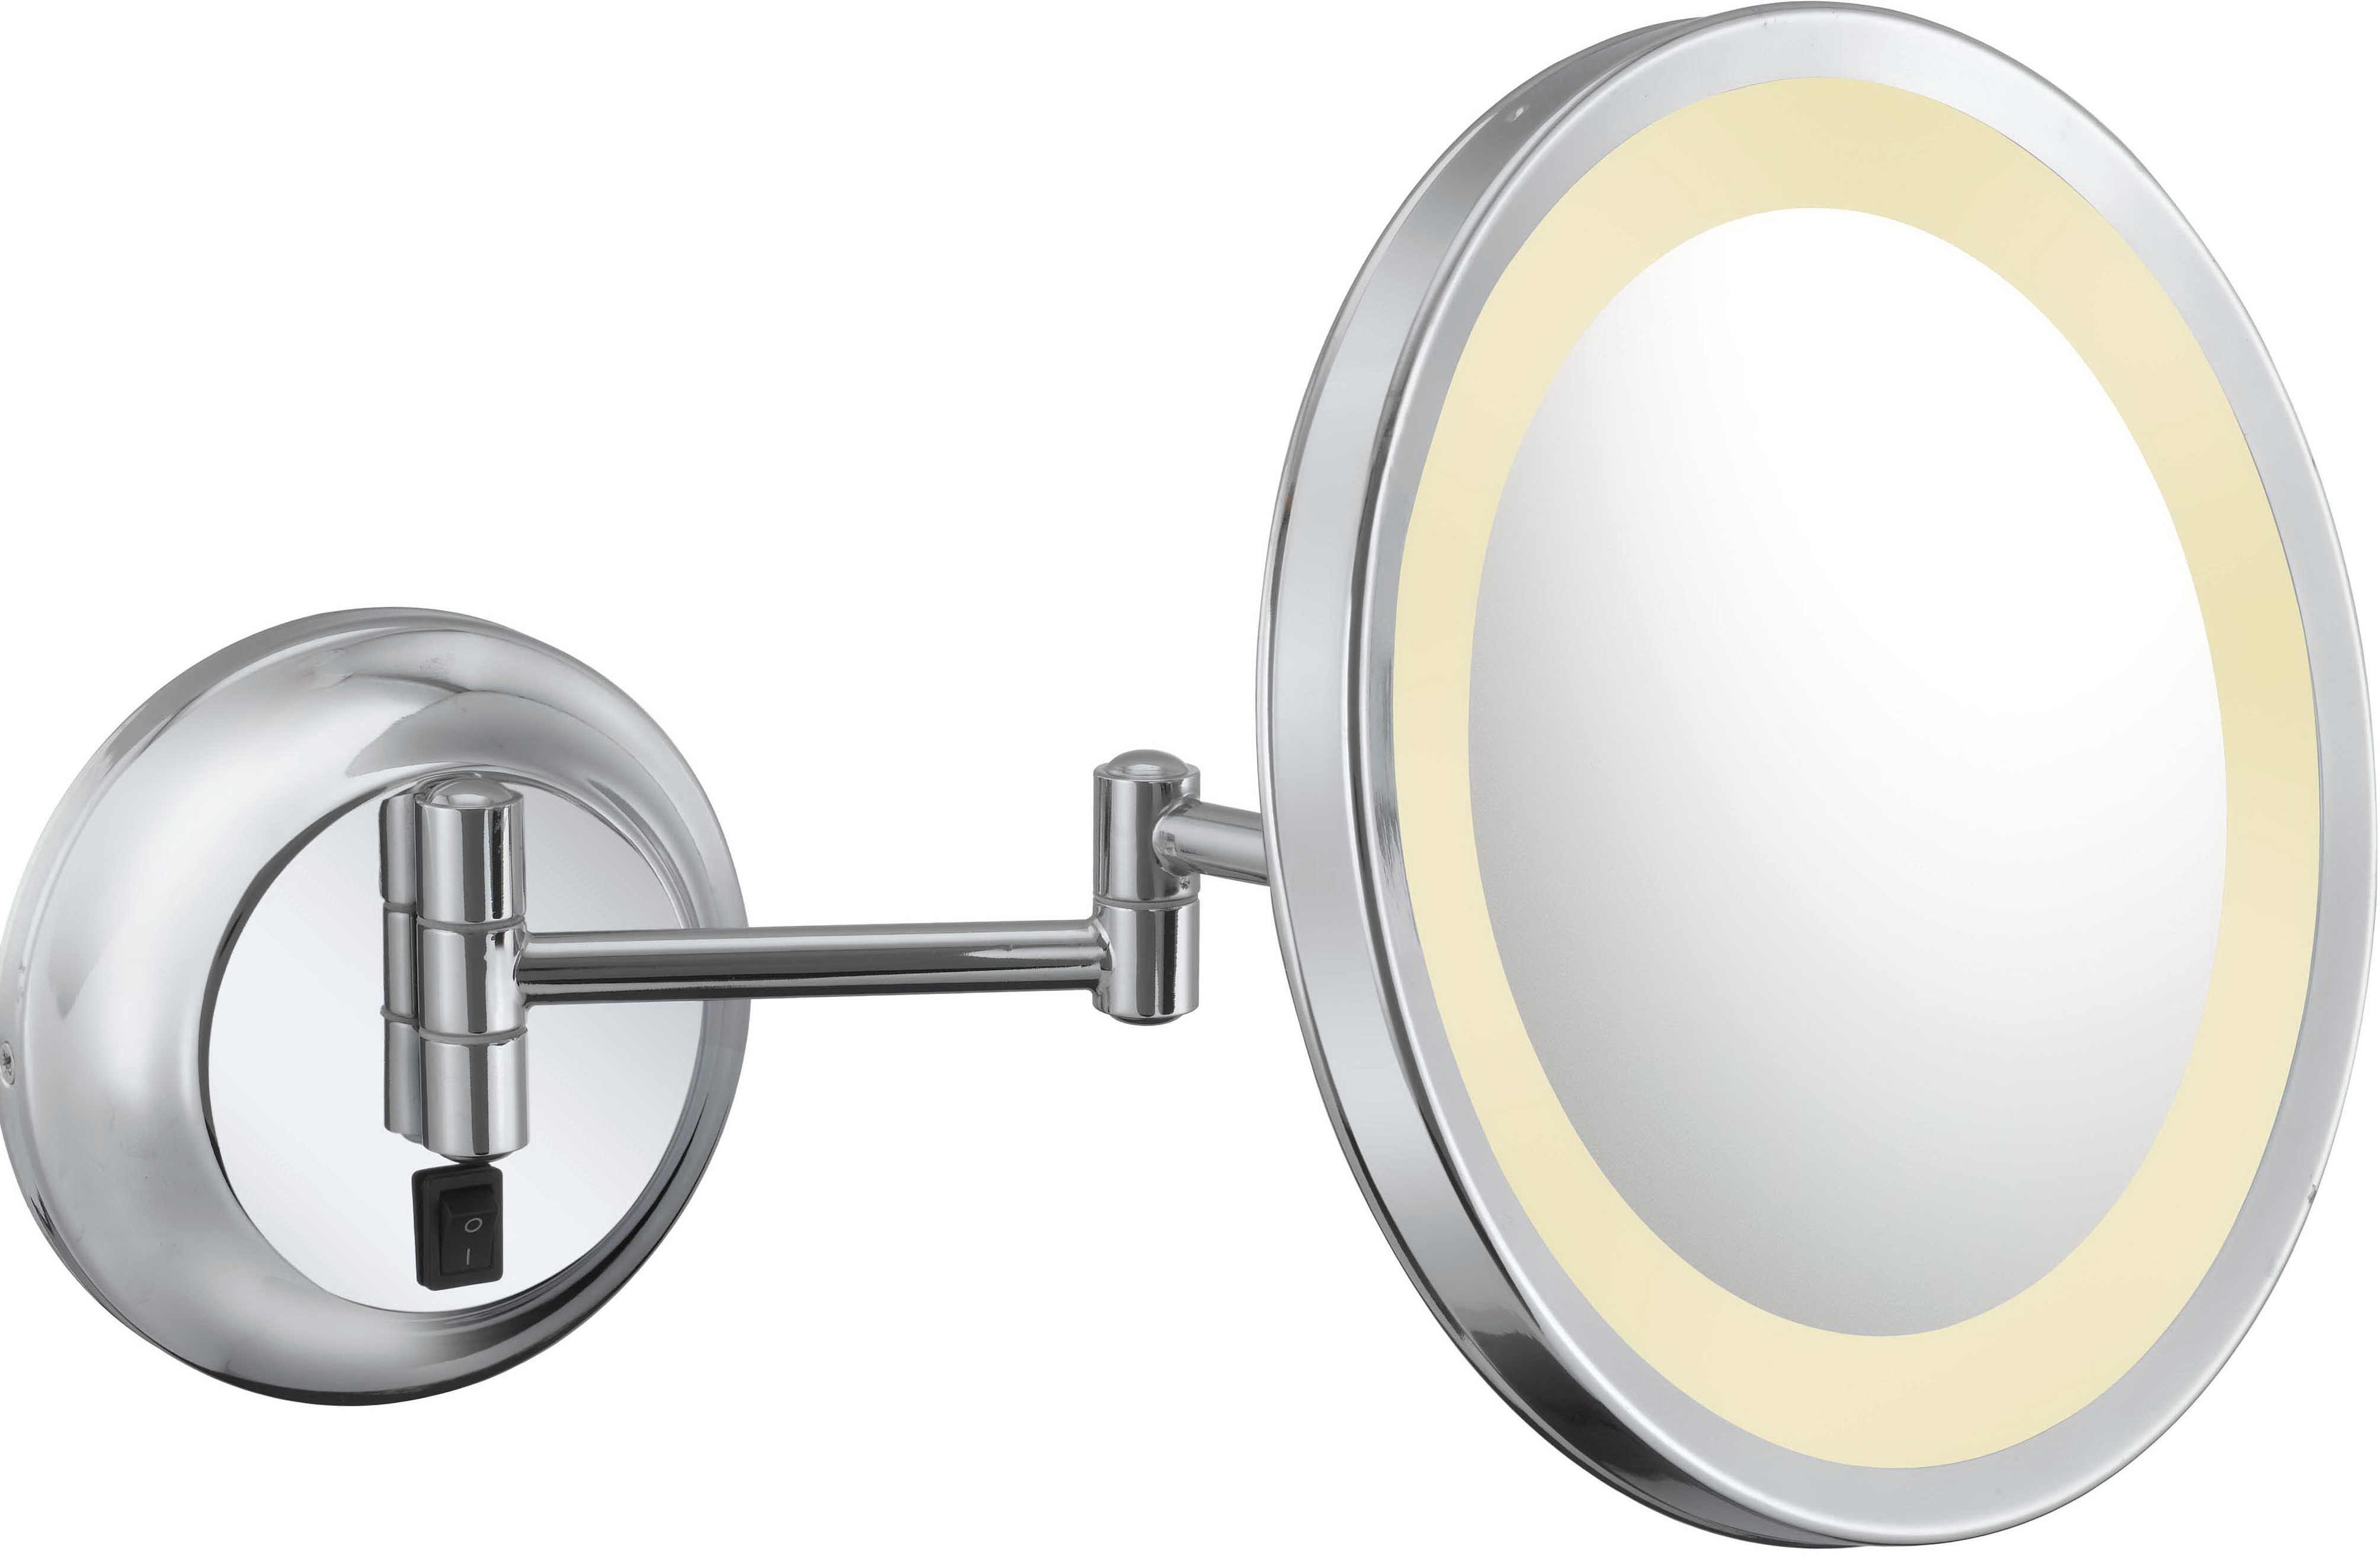 Lighted Magnifying Mirror Hardwired | Home Design Ideas